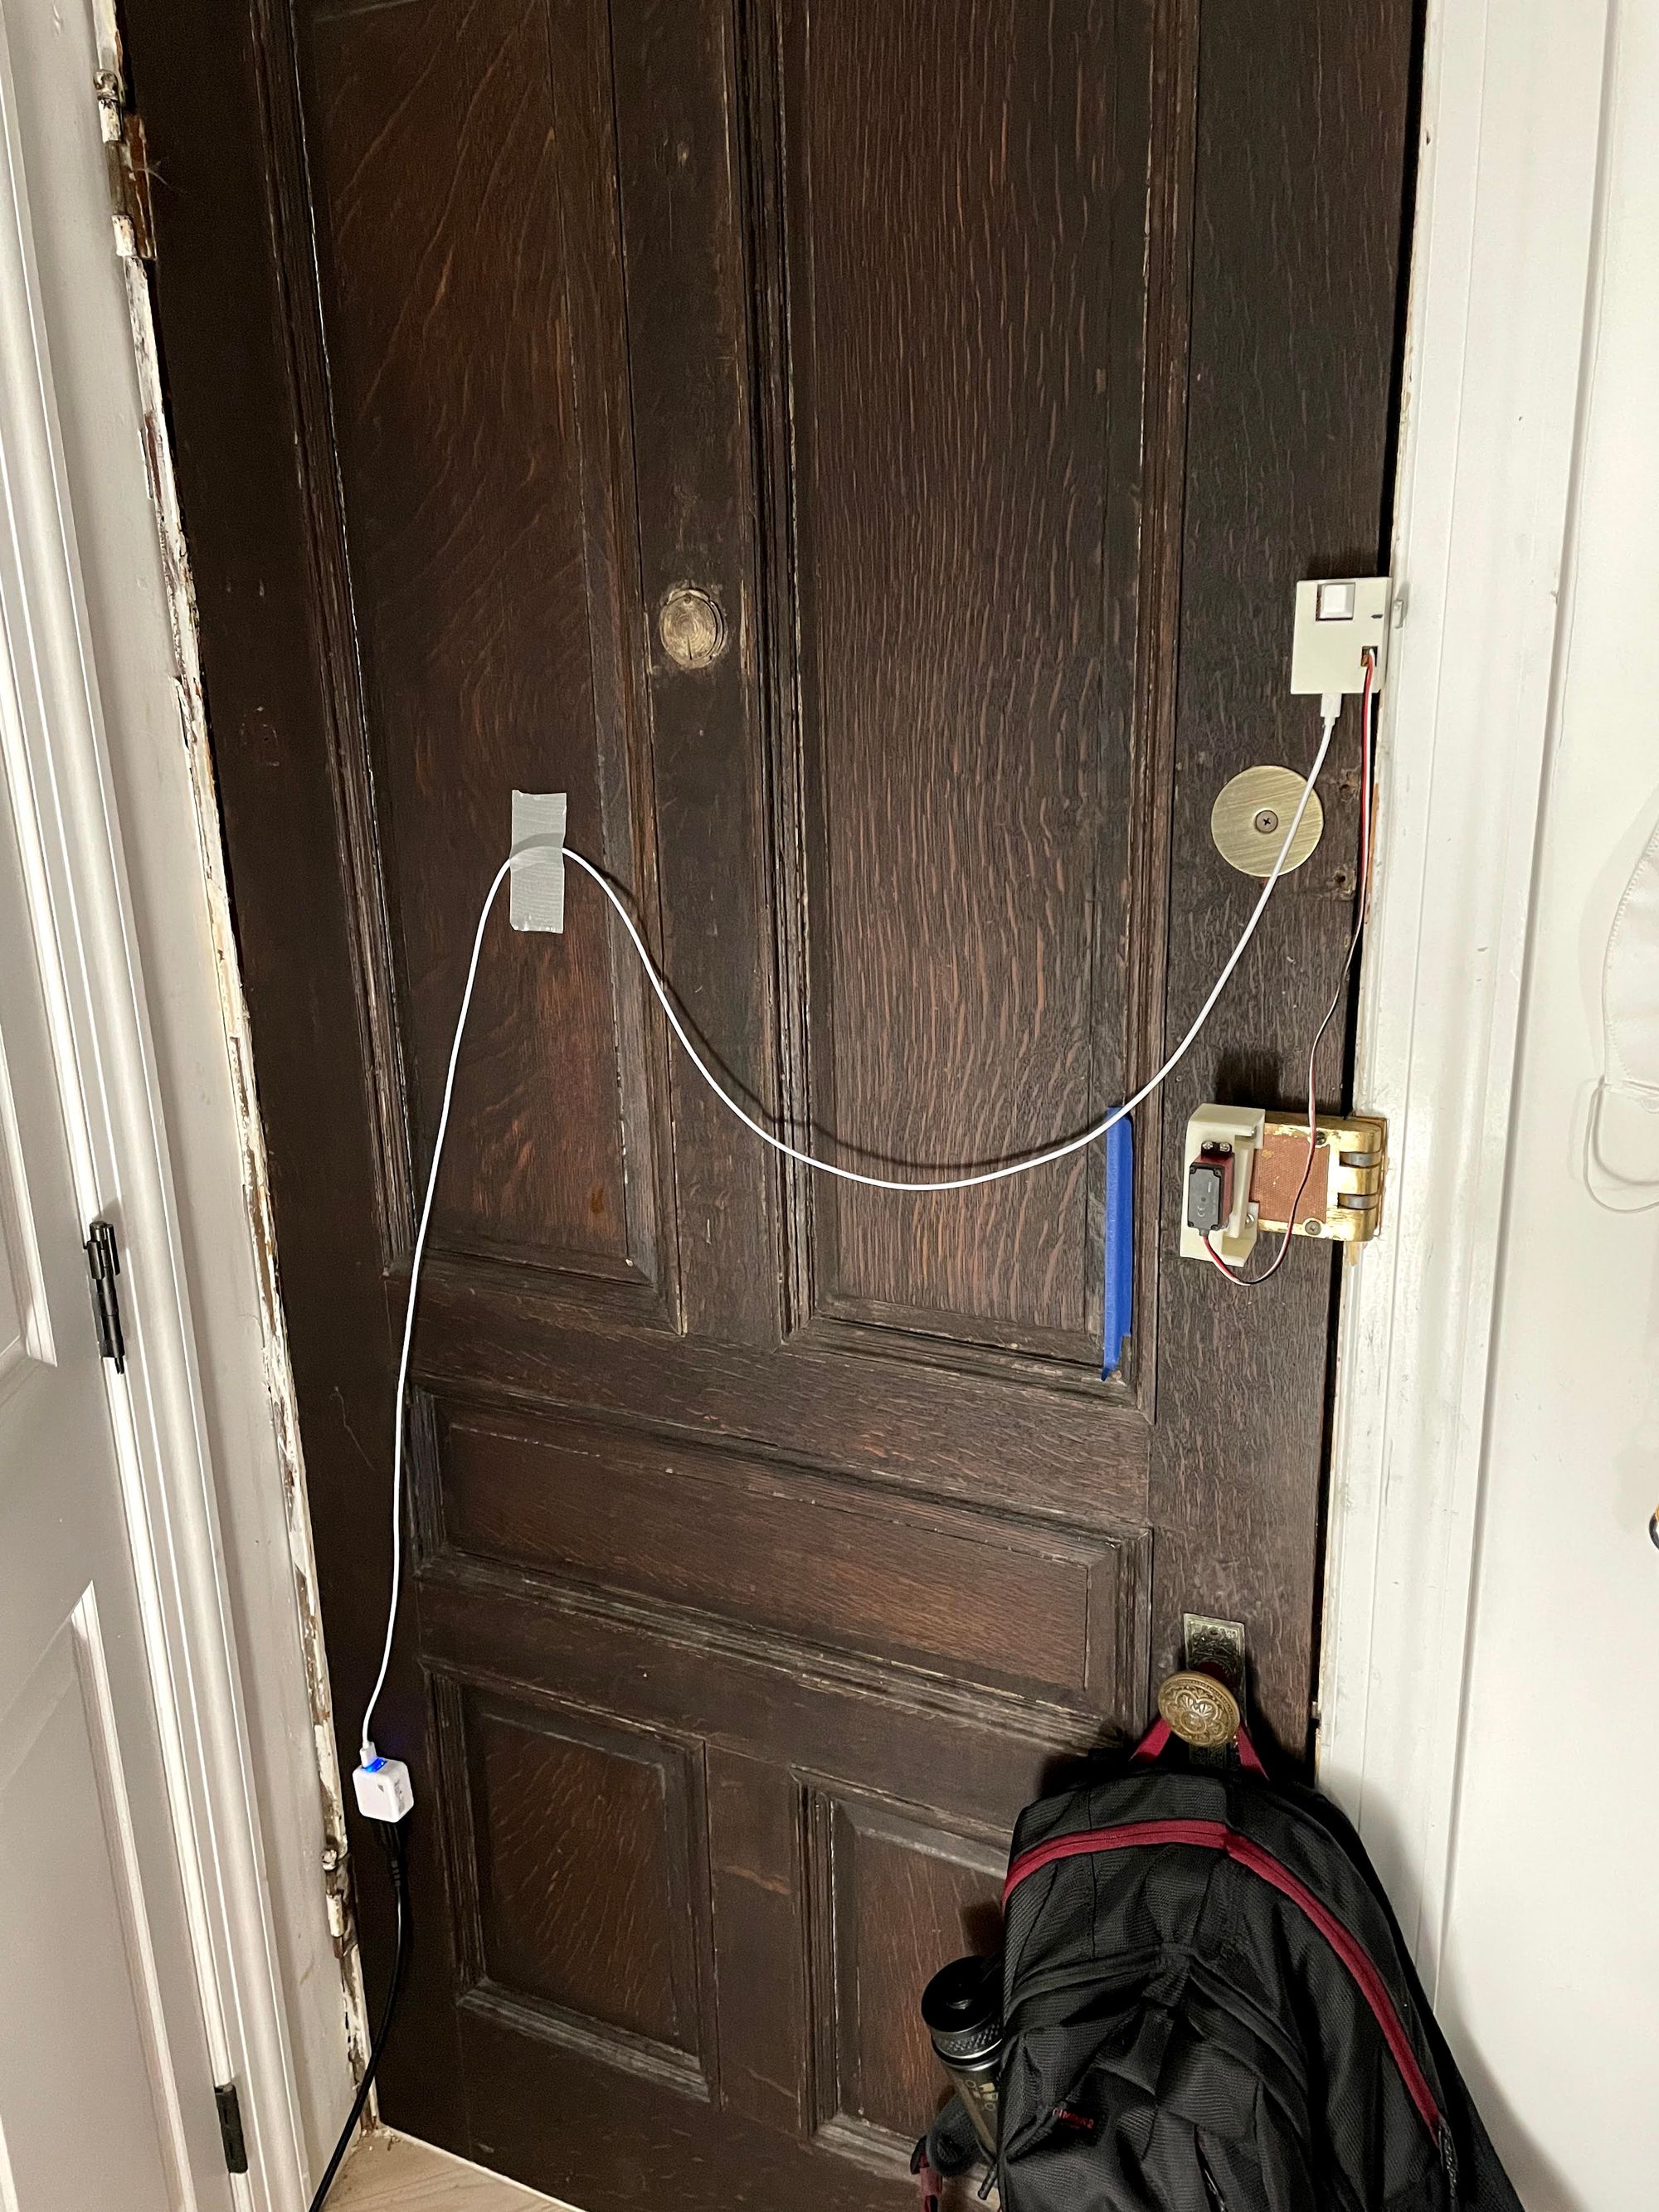 Putting off installing smart locks? Here's why I'm glad I finally did